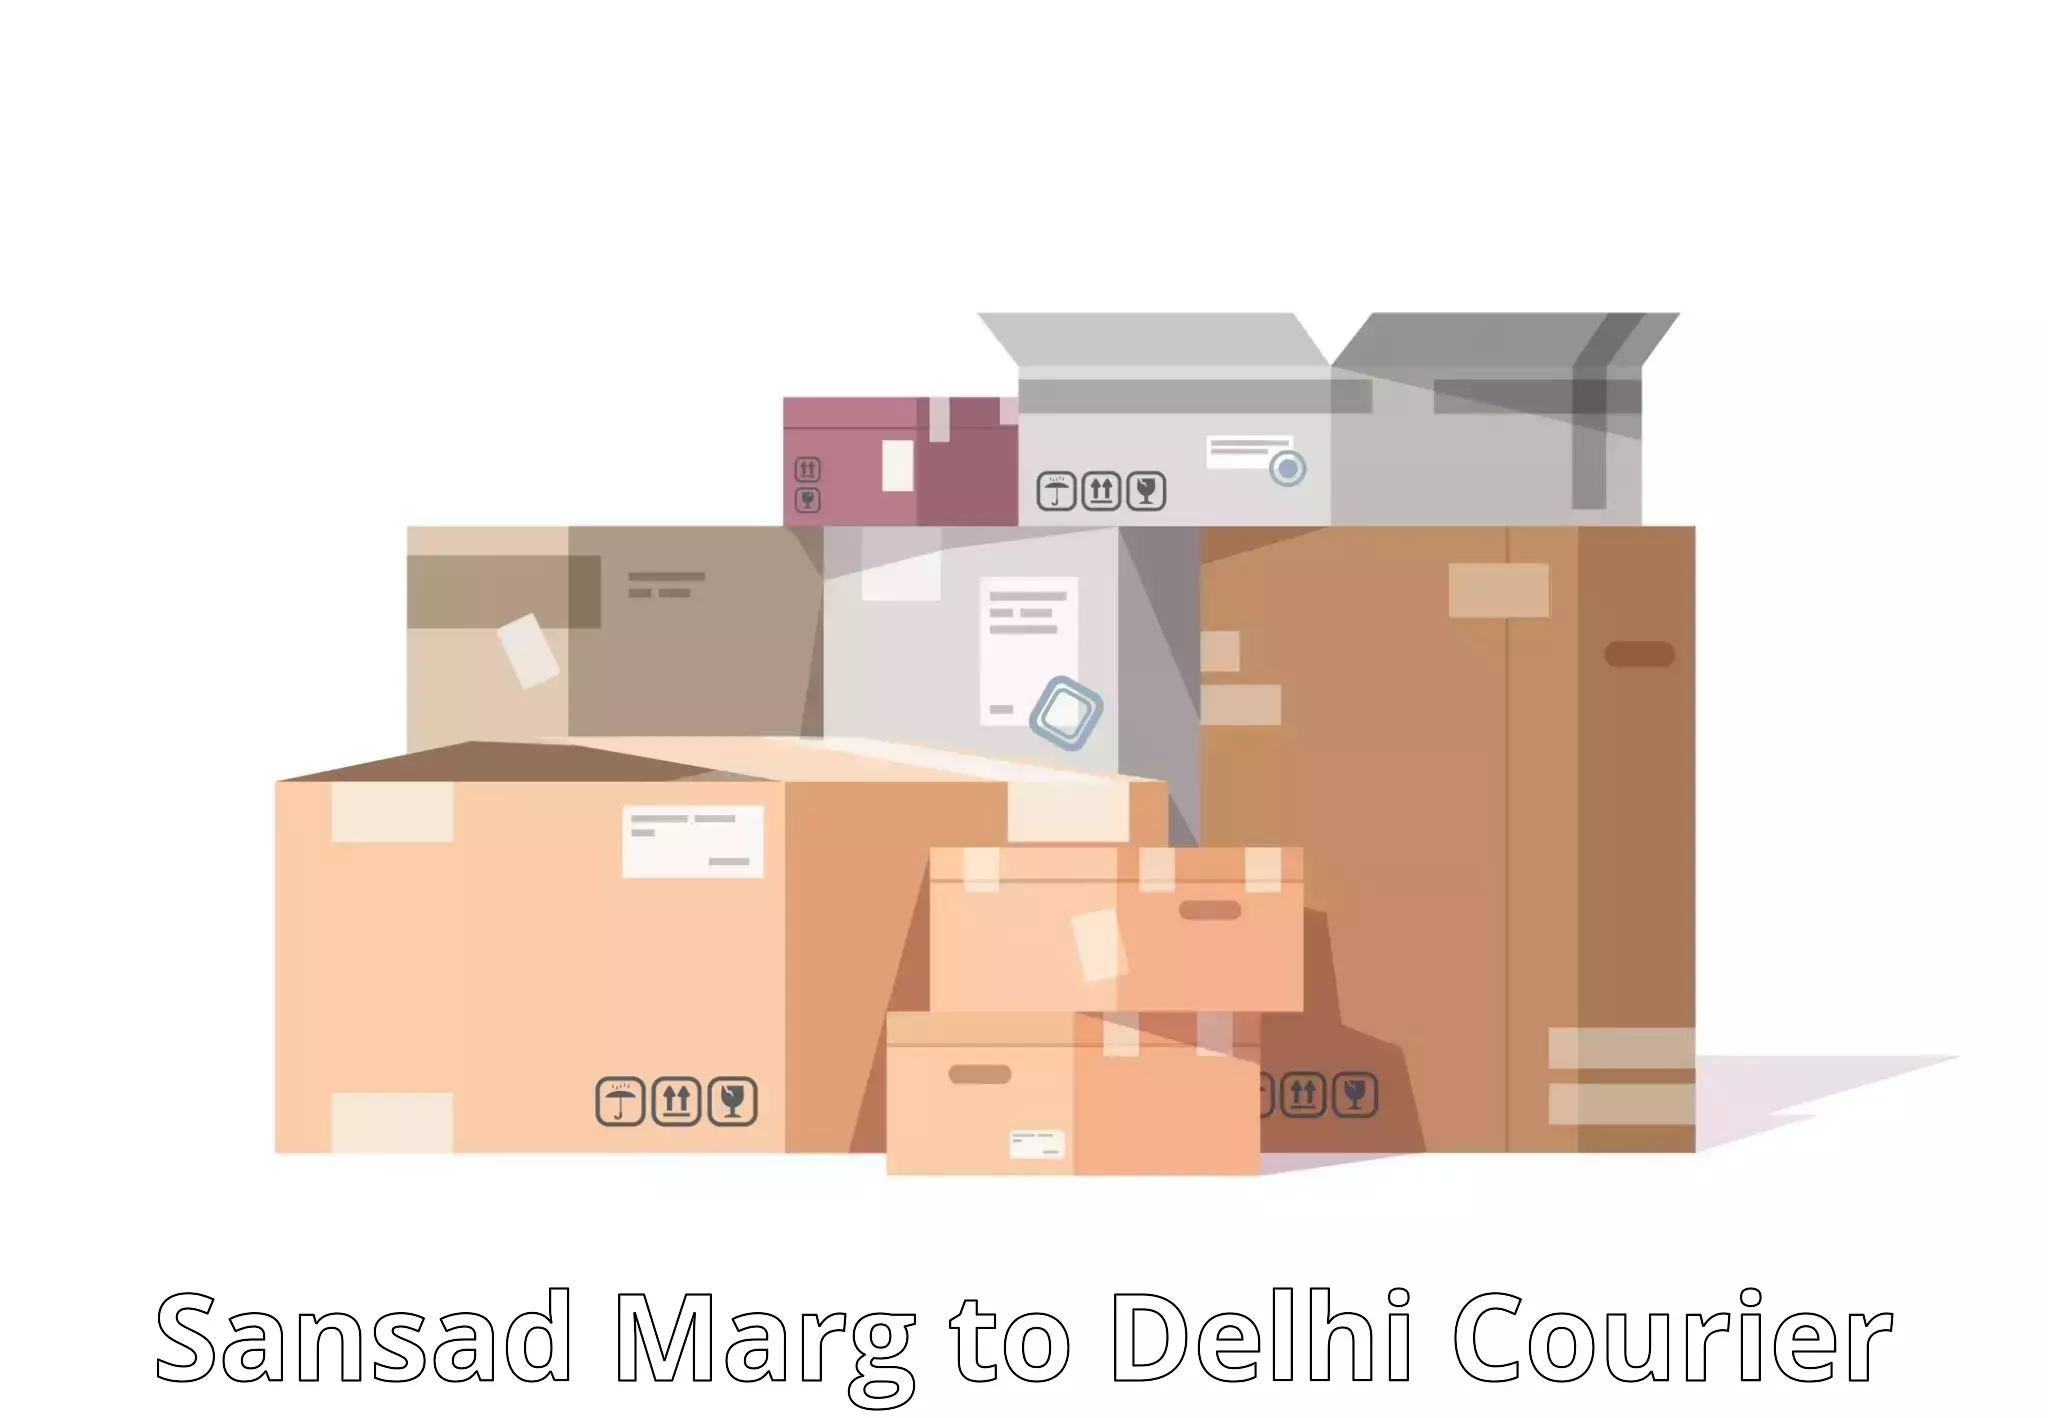 Express delivery capabilities in Sansad Marg to IIT Delhi